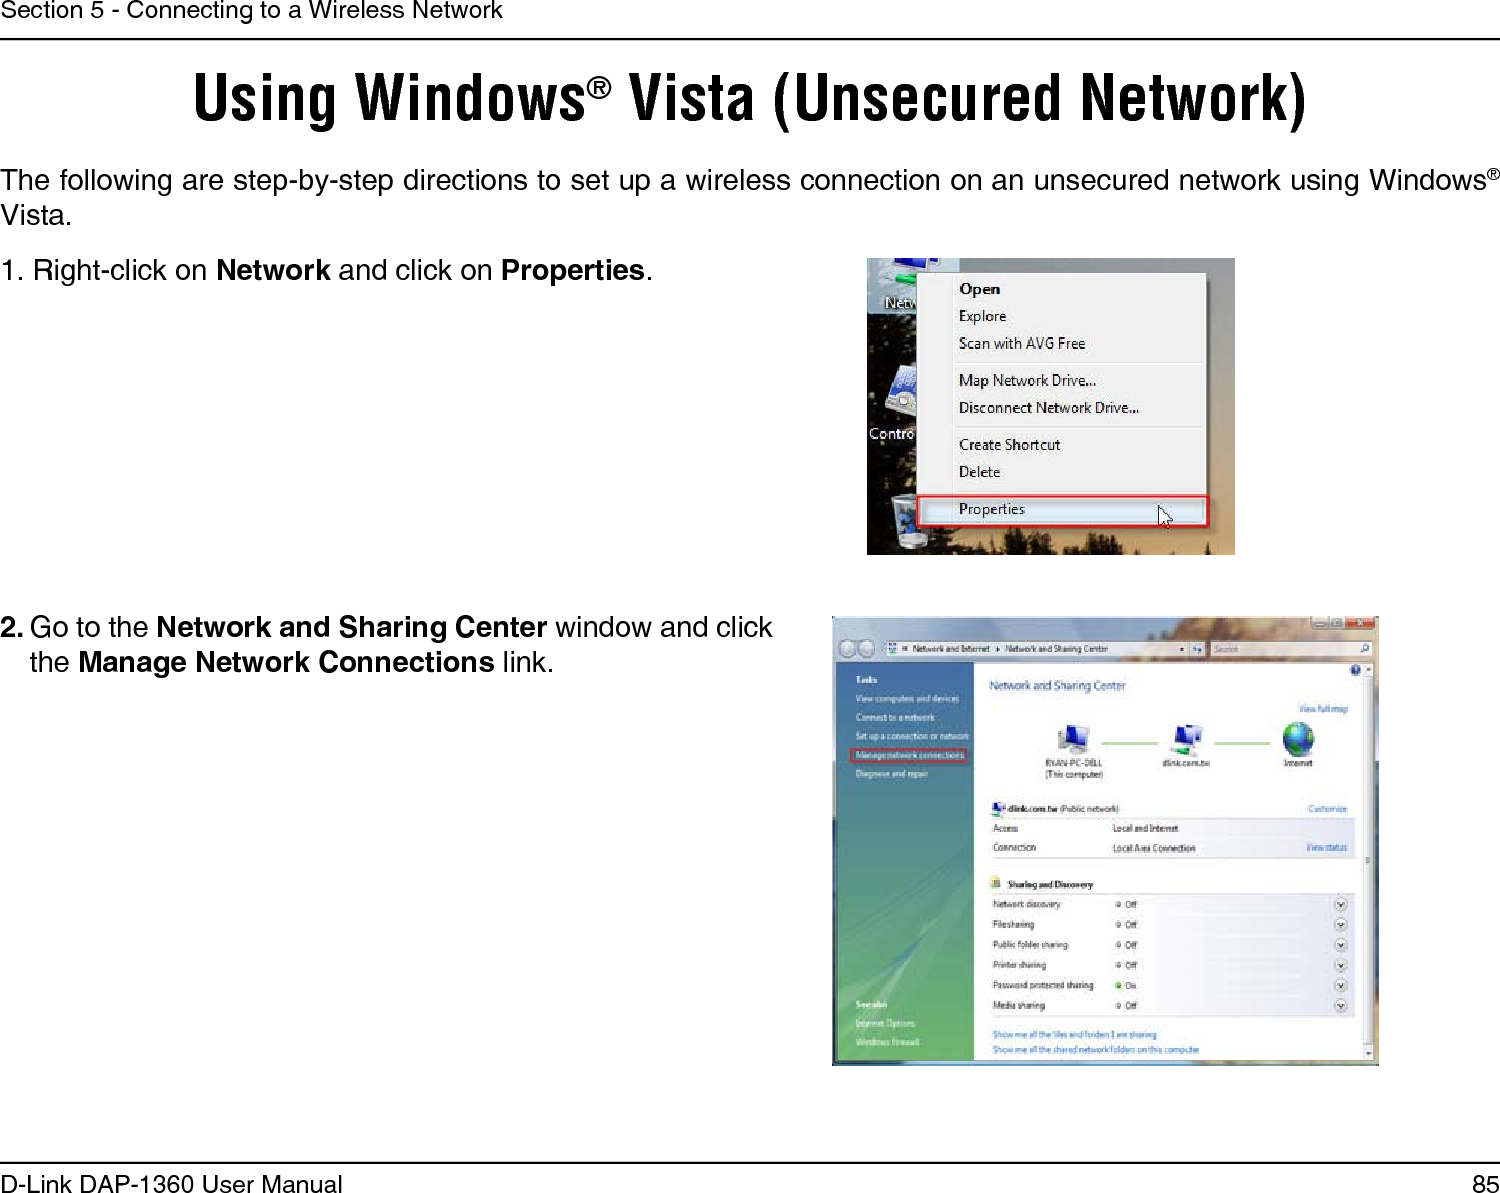 85D-Link DAP-1360 User ManualSection 5 - Connecting to a Wireless NetworkUsing Windows® Vista (Unsecured Network)The following are step-by-step directions to set up a wireless connection on an unsecured network using Windows® Vista.2. Go to the Network and Sharing Center window and click the Manage Network Connections link. 1. Right-click on Network and click on Properties.     